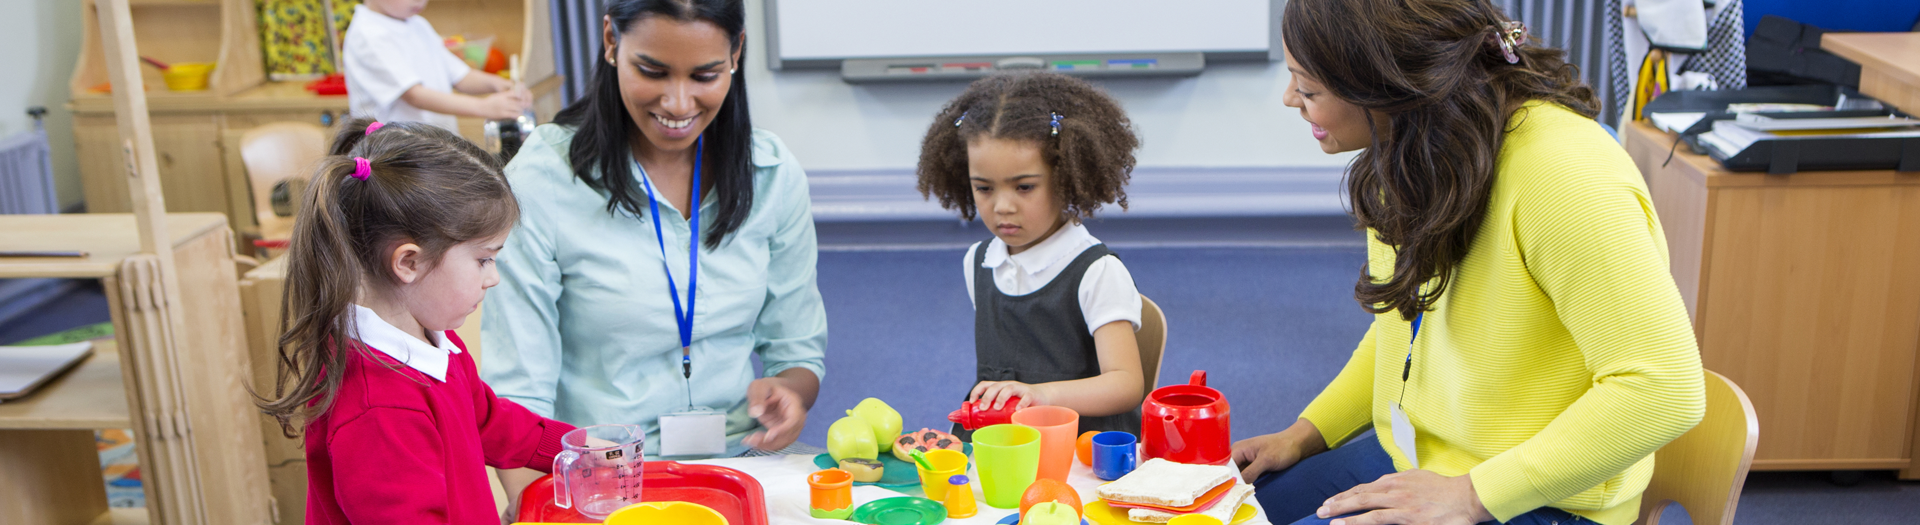 Child care providers with children in a classroom